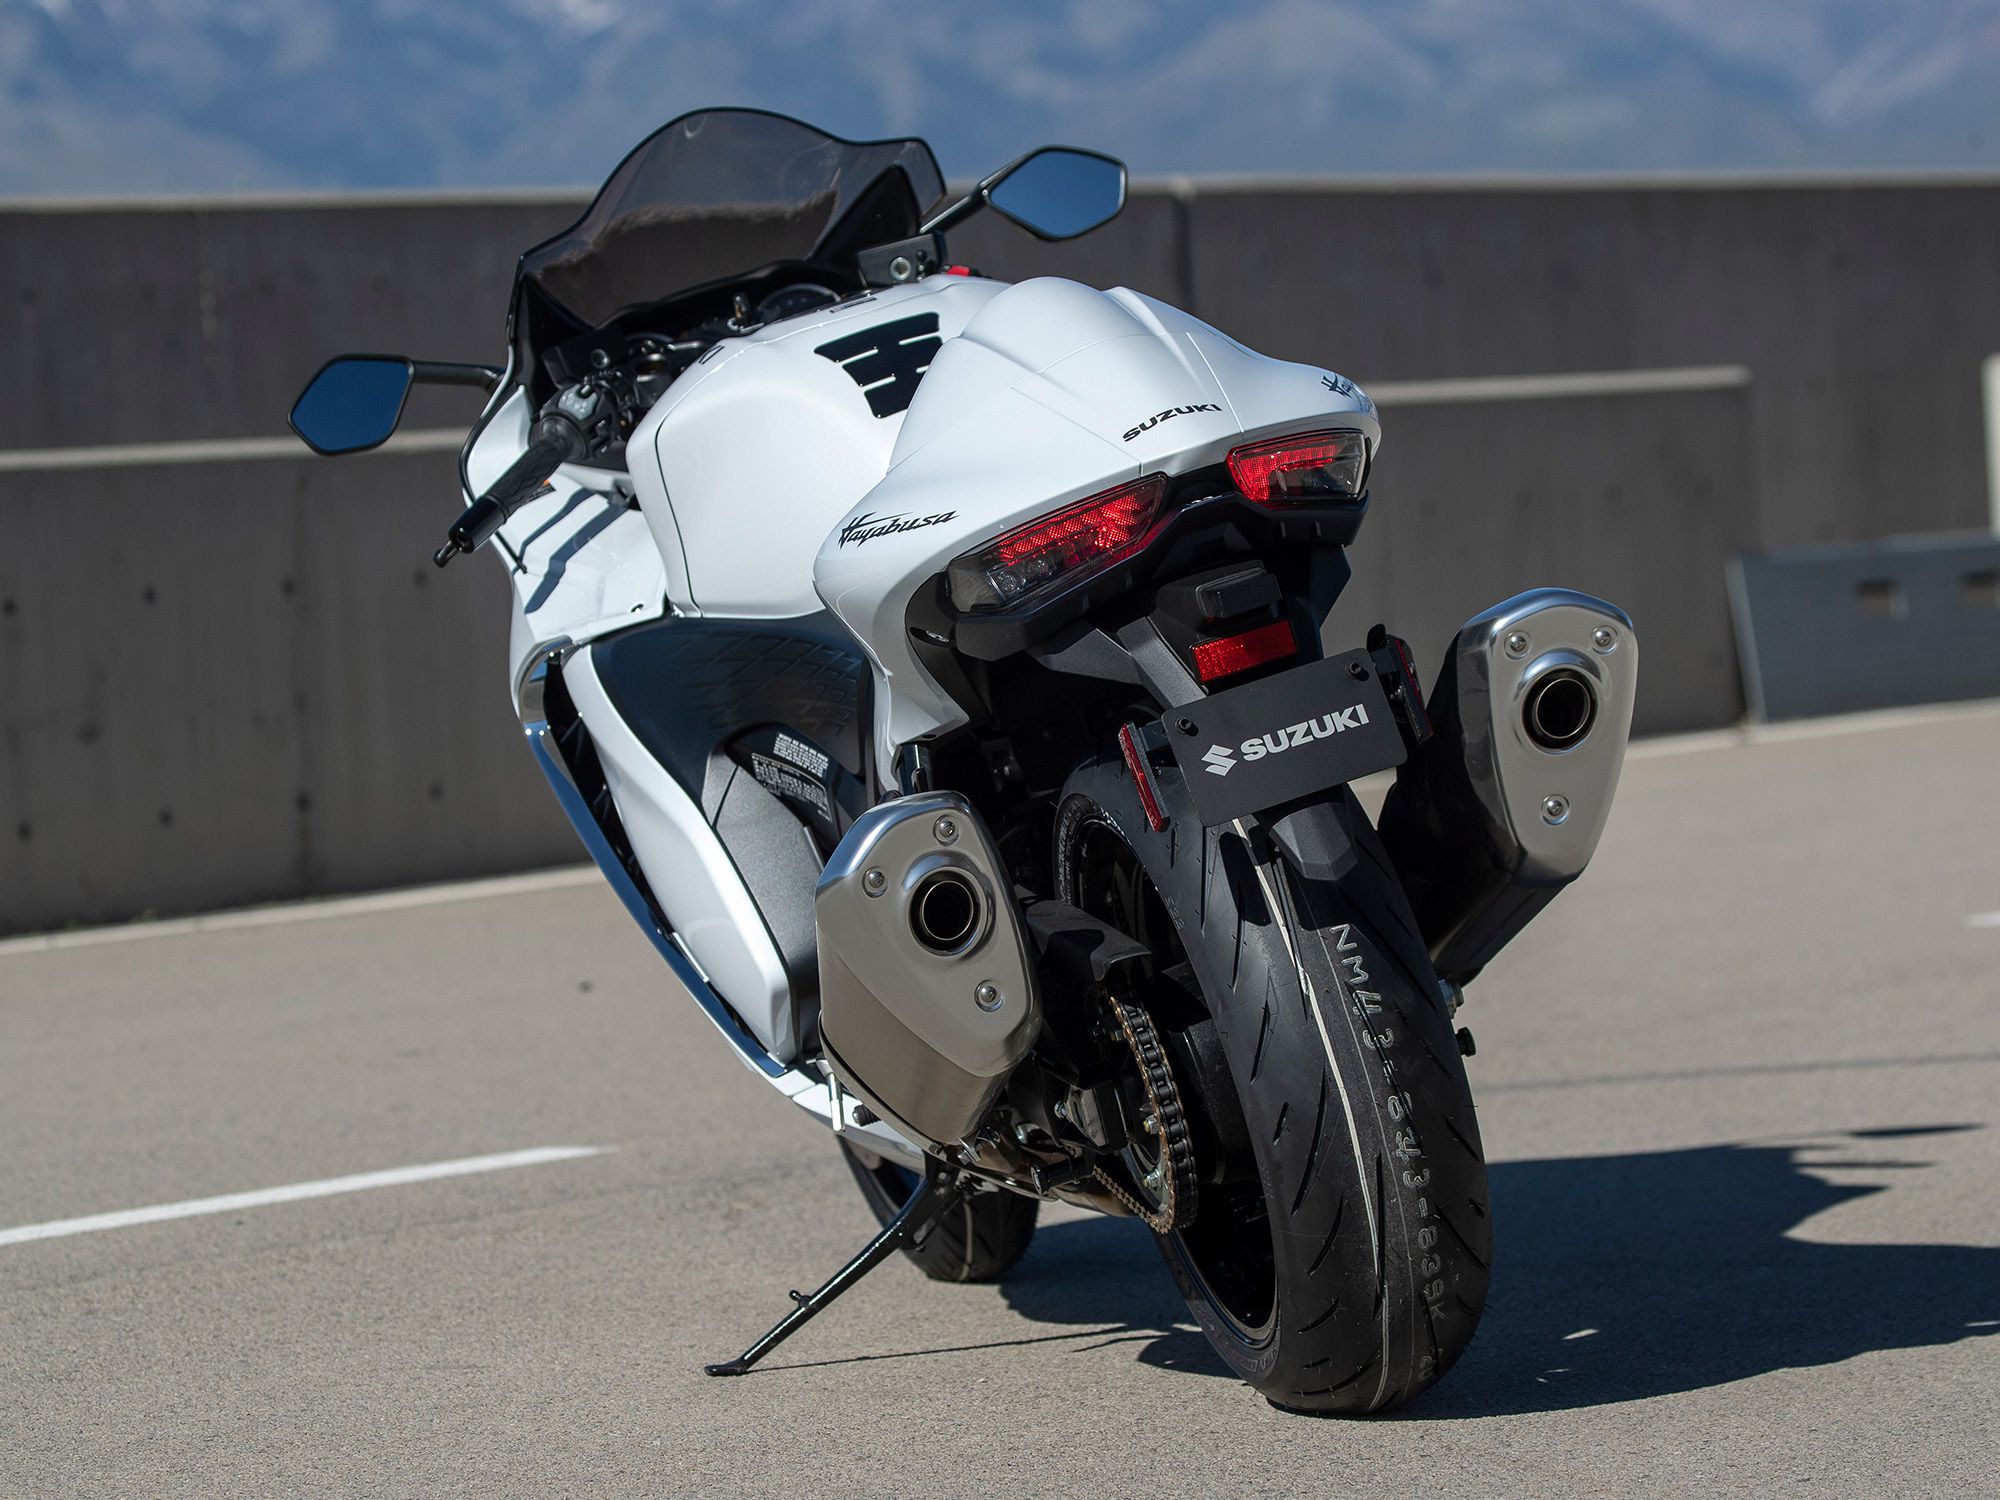 Leaner and meaner, the Hayabusa is sure to turn heads with its windtunnel born styling.